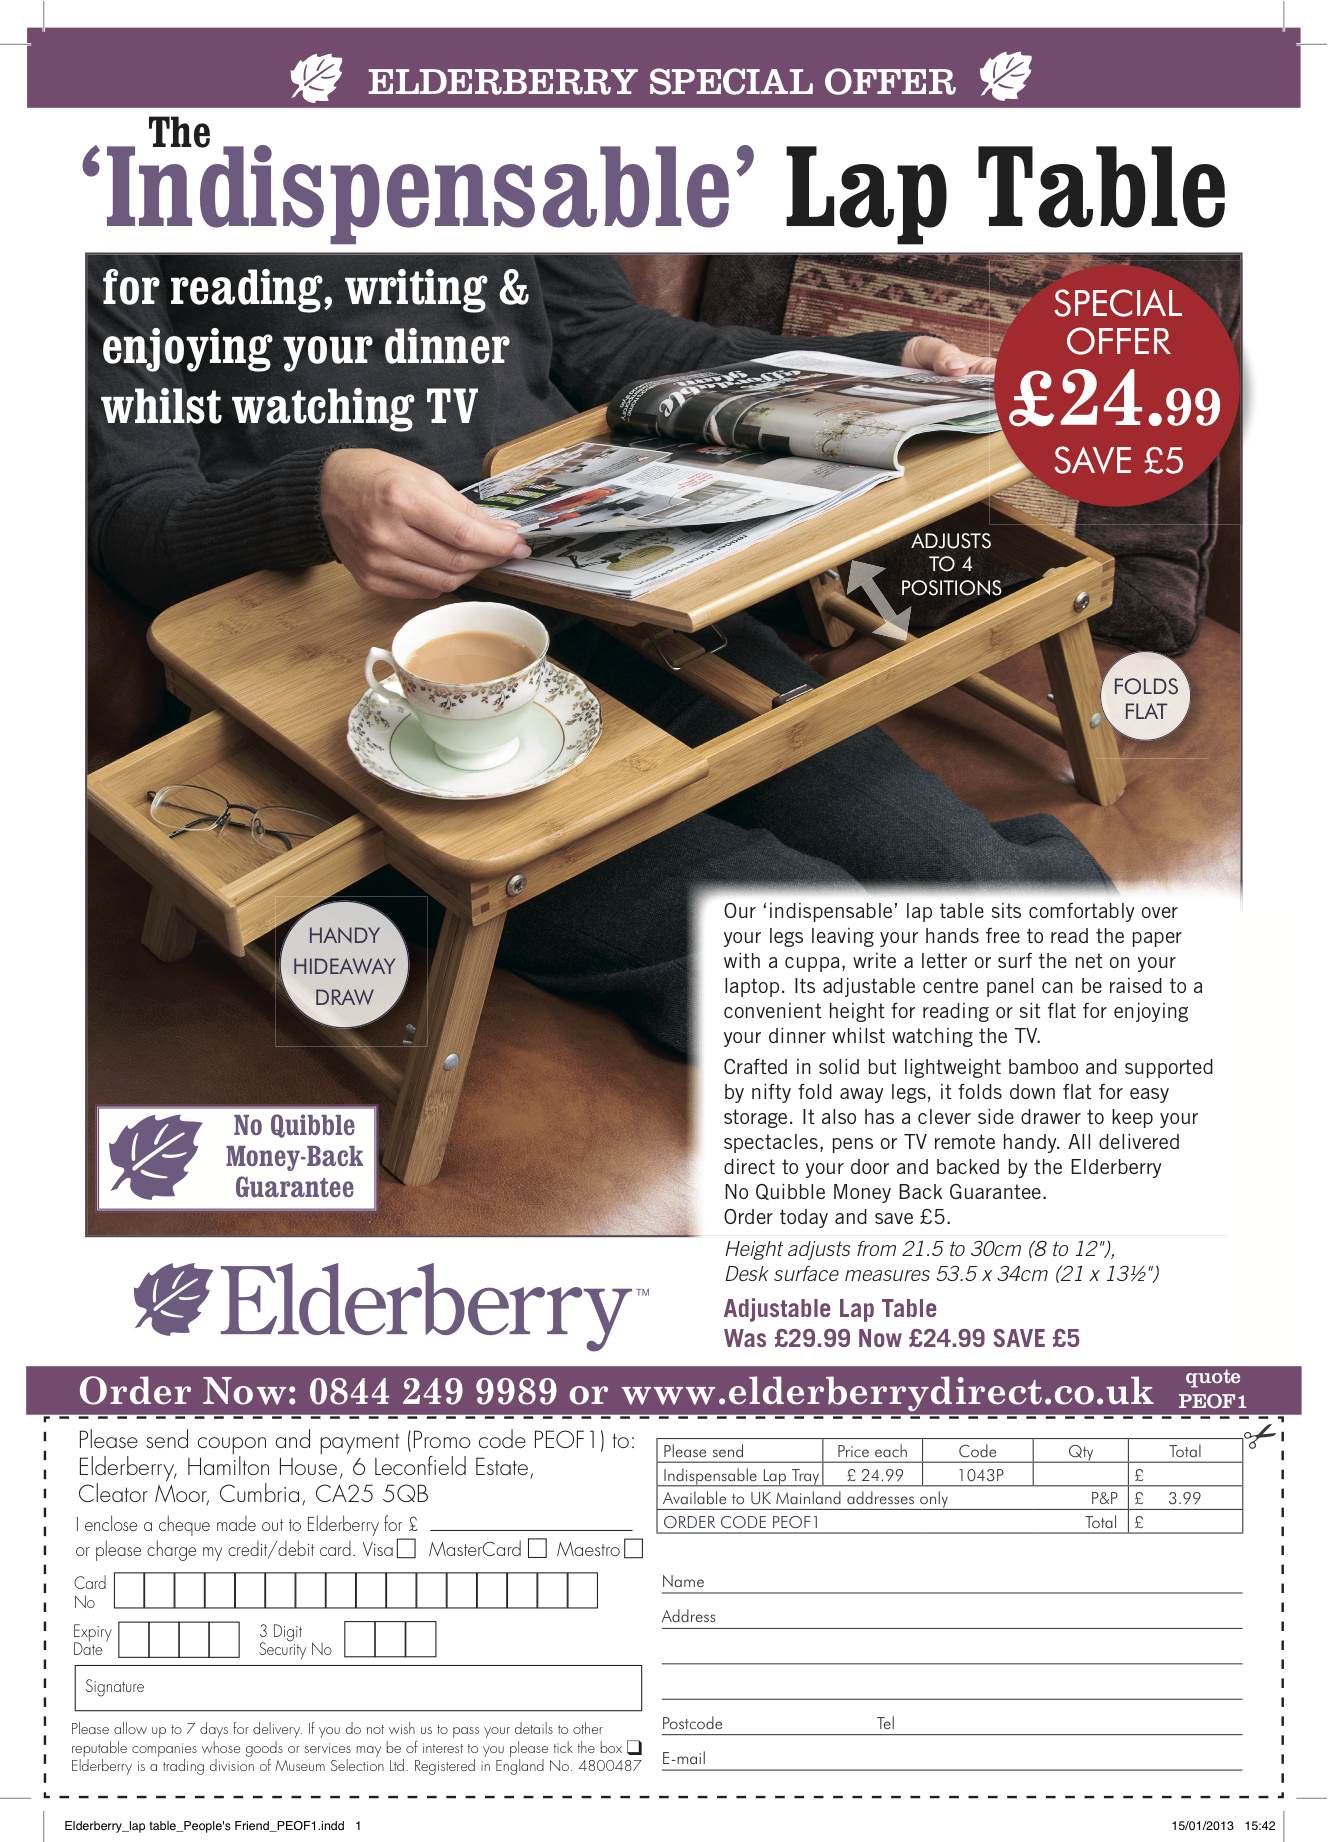 off the page advertising, Elderberry